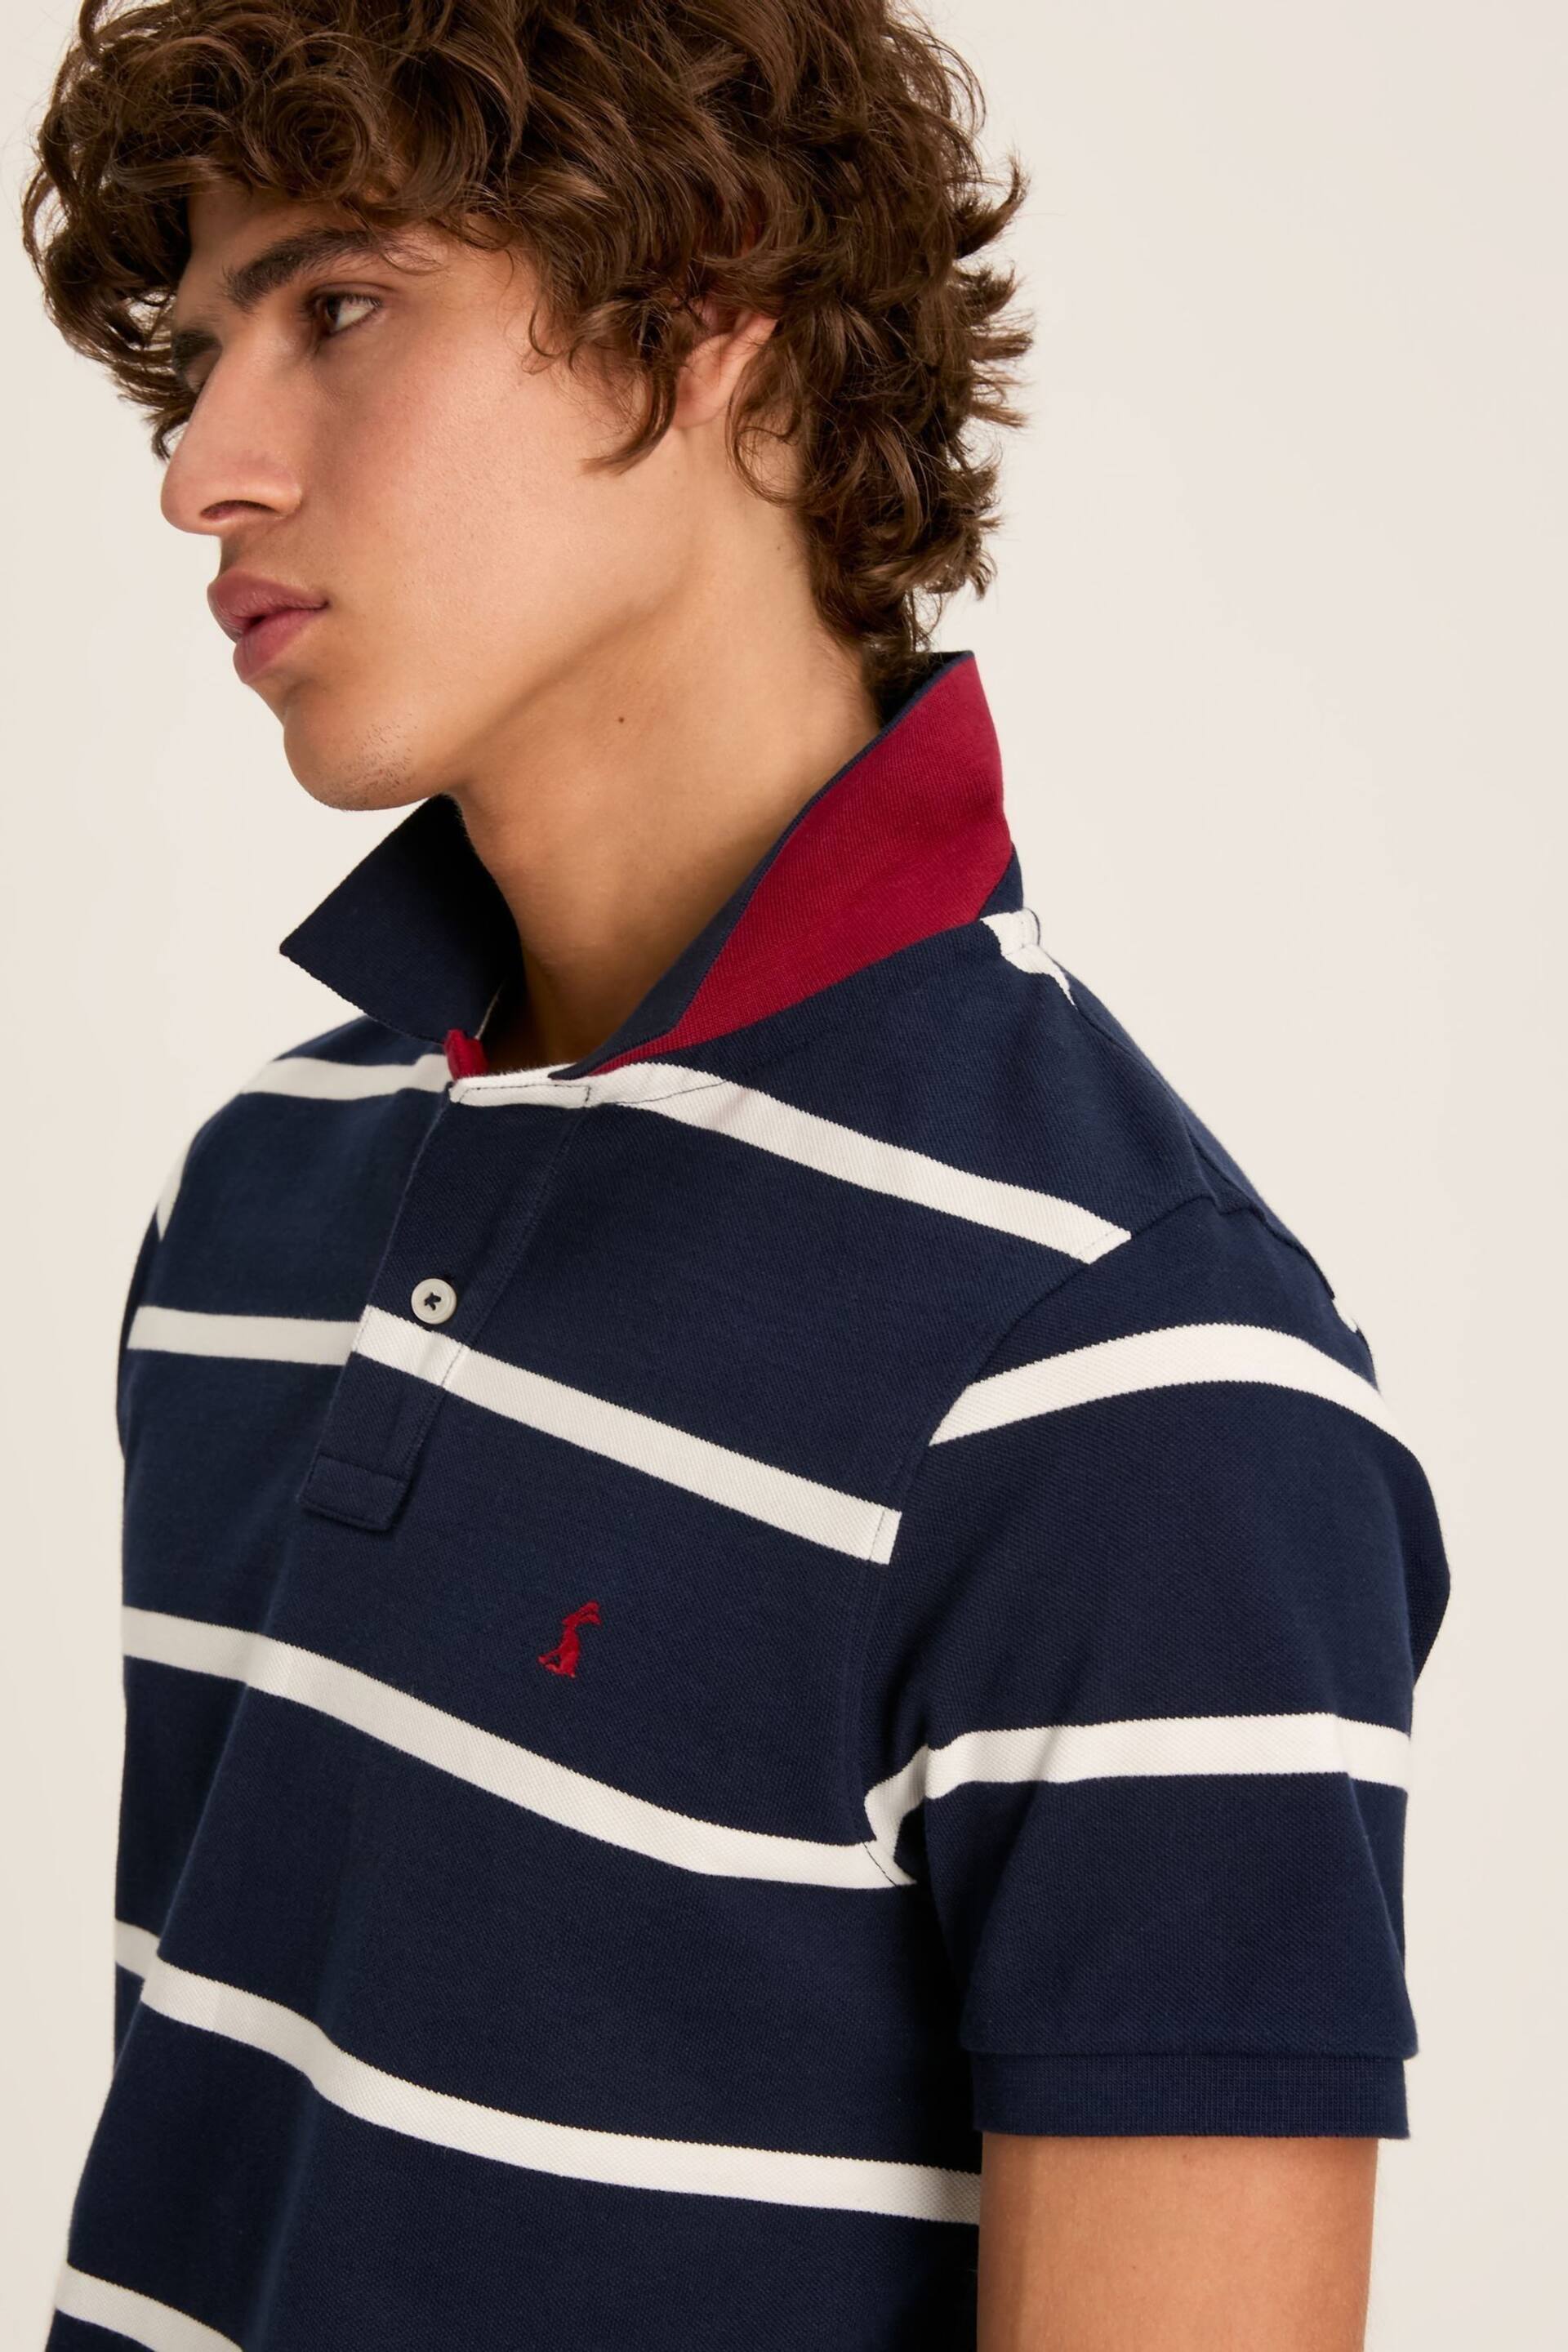 Joules Filbert Navy/White Slim Fit Striped Polo Shirt - Image 6 of 8